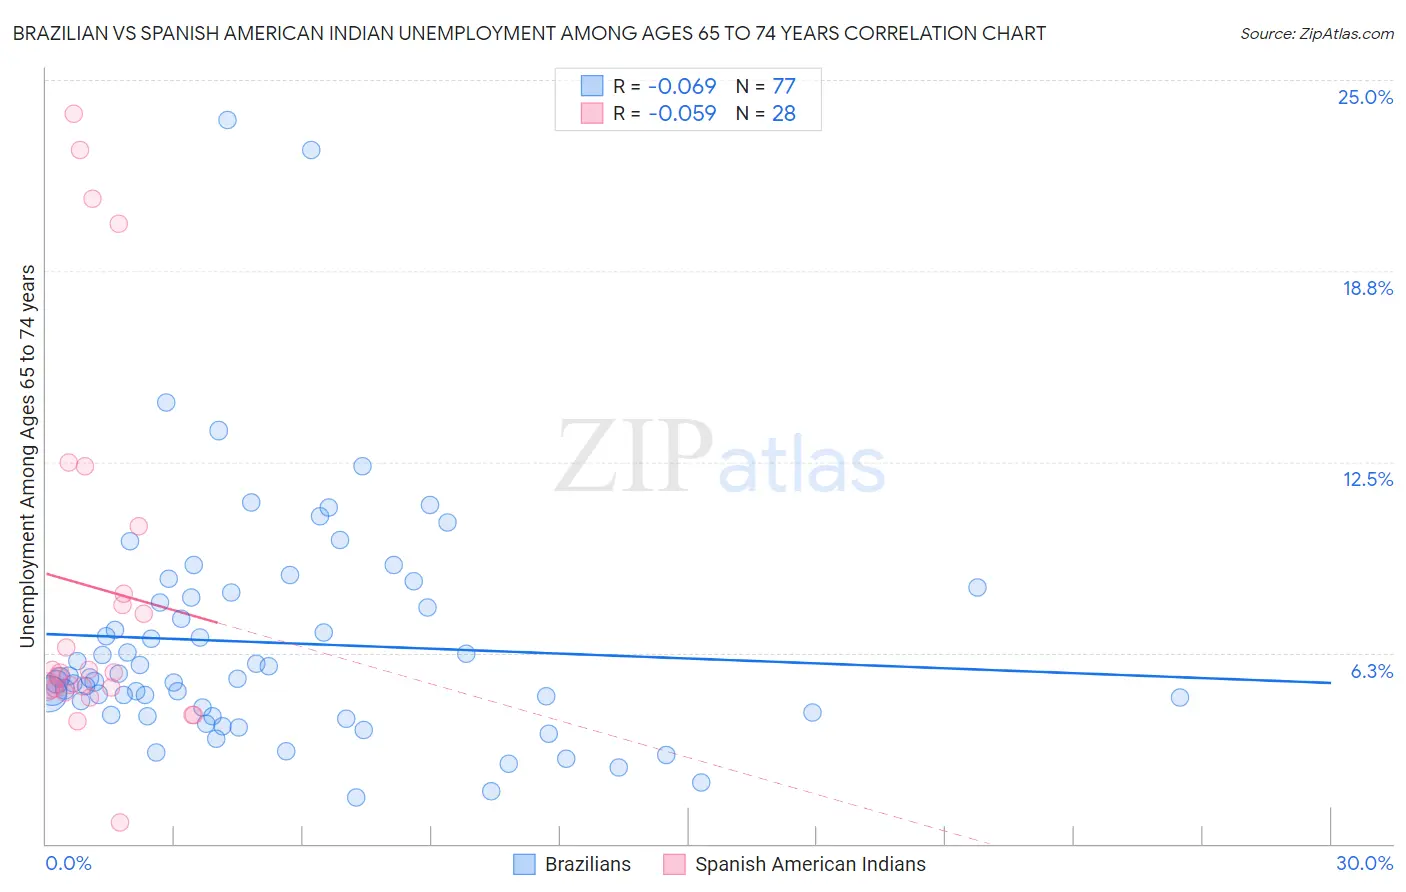 Brazilian vs Spanish American Indian Unemployment Among Ages 65 to 74 years